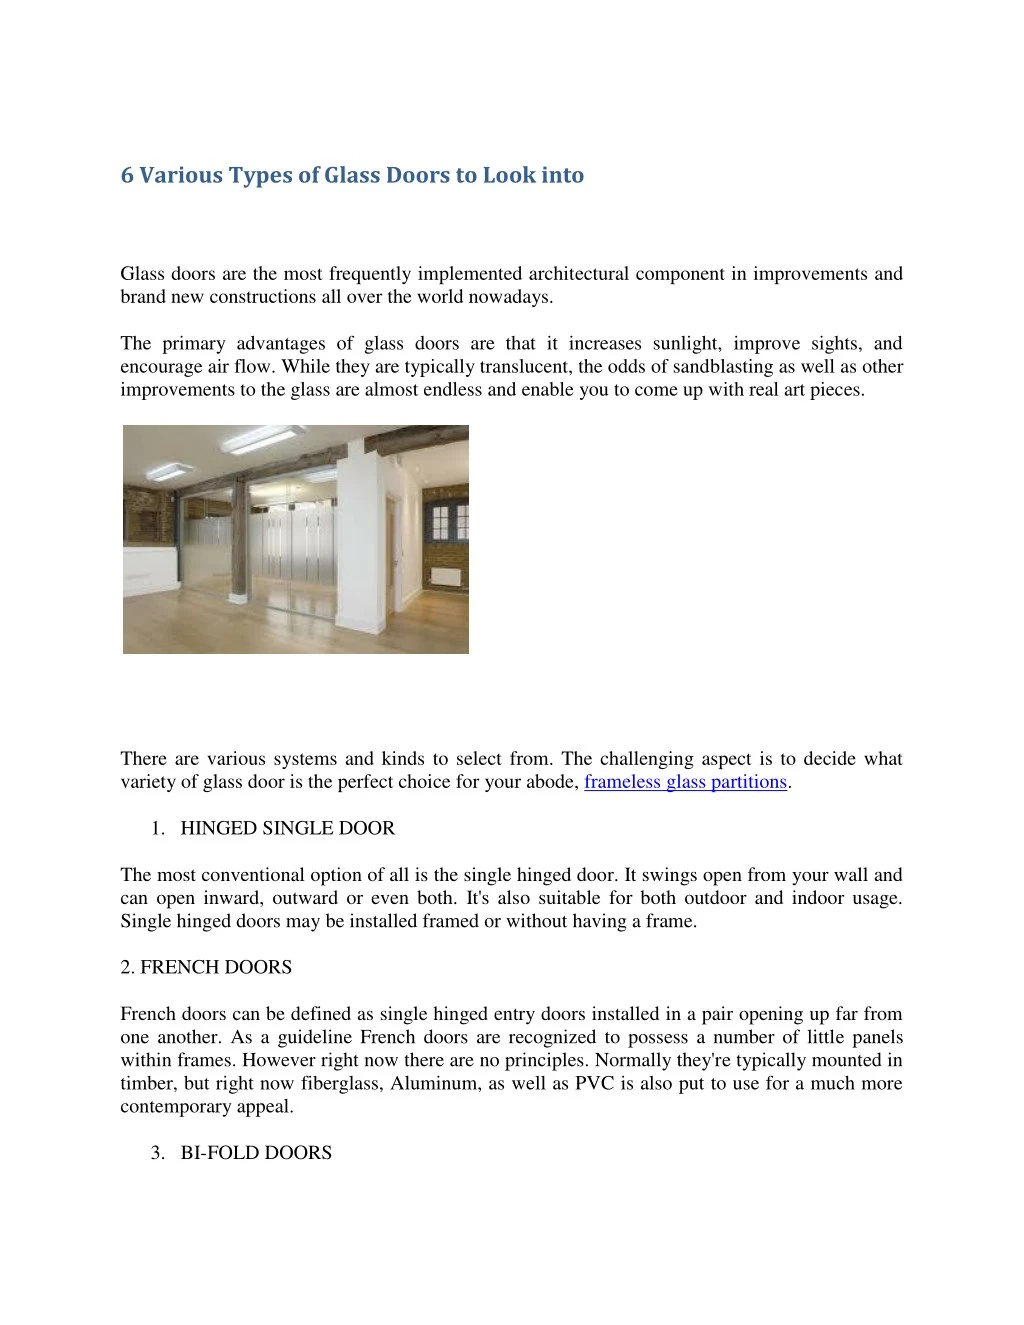 6 various types of glass doors to look into